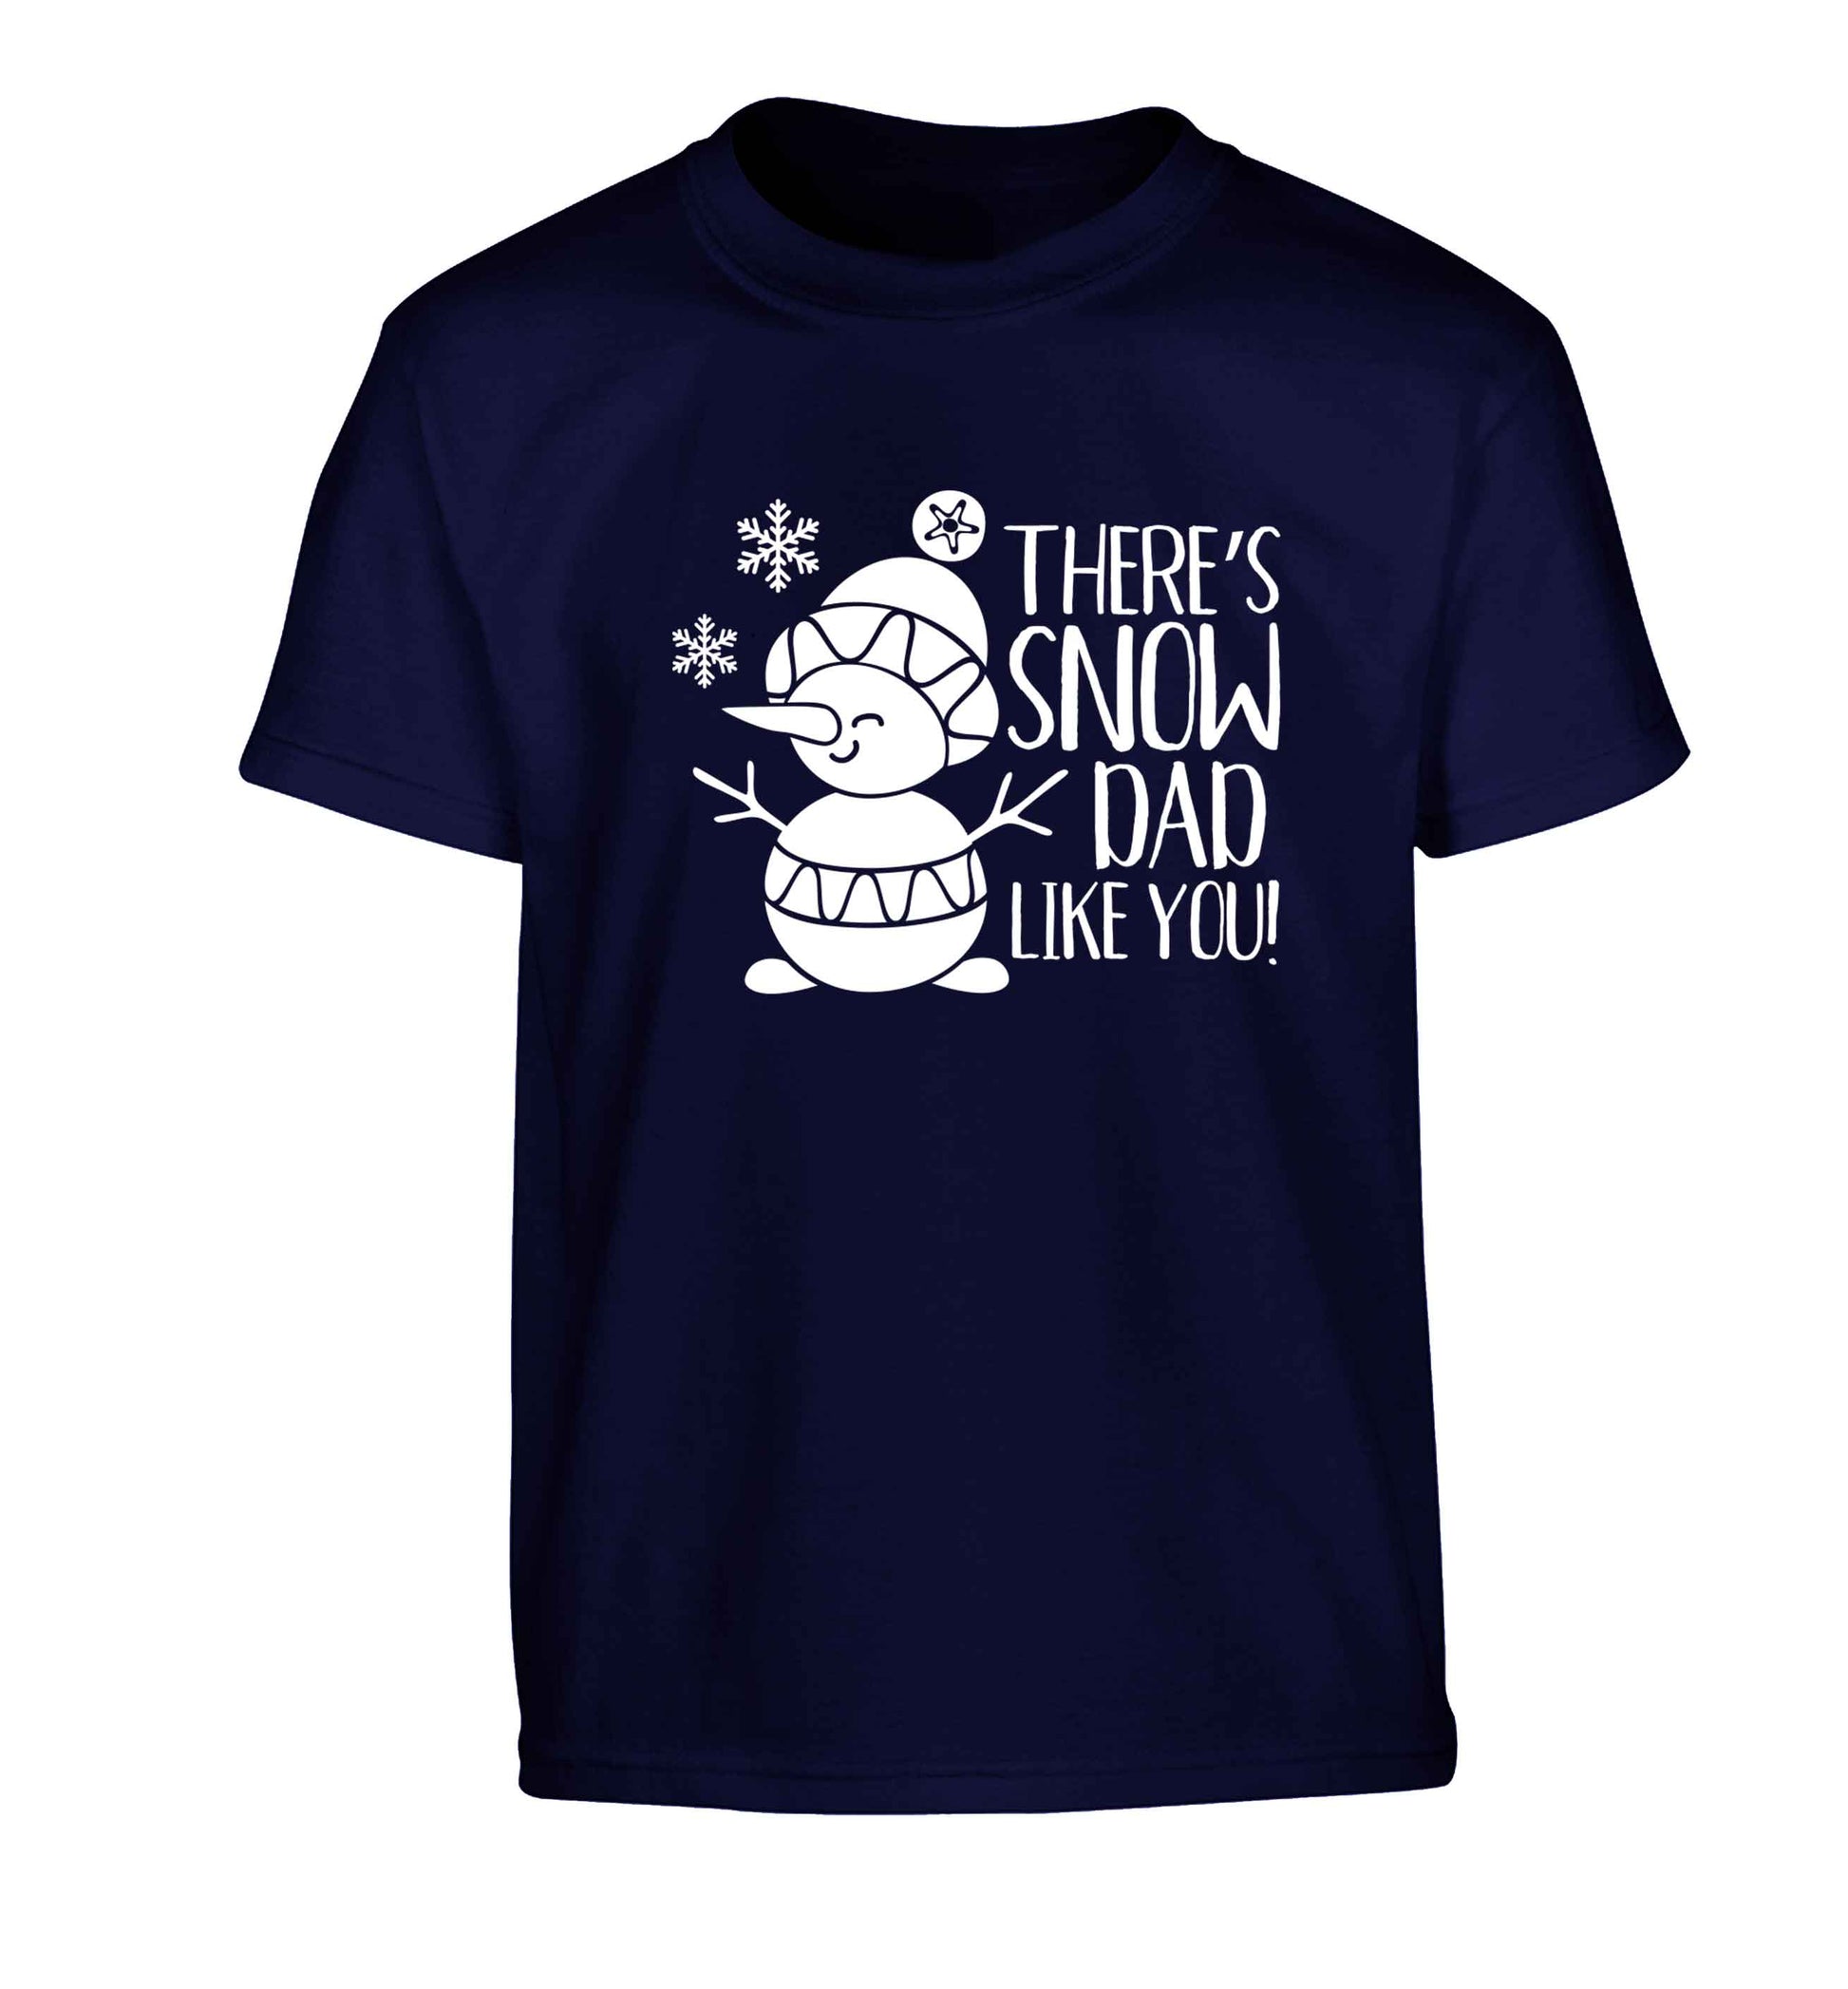 There's snow dad like you Children's navy Tshirt 12-13 Years